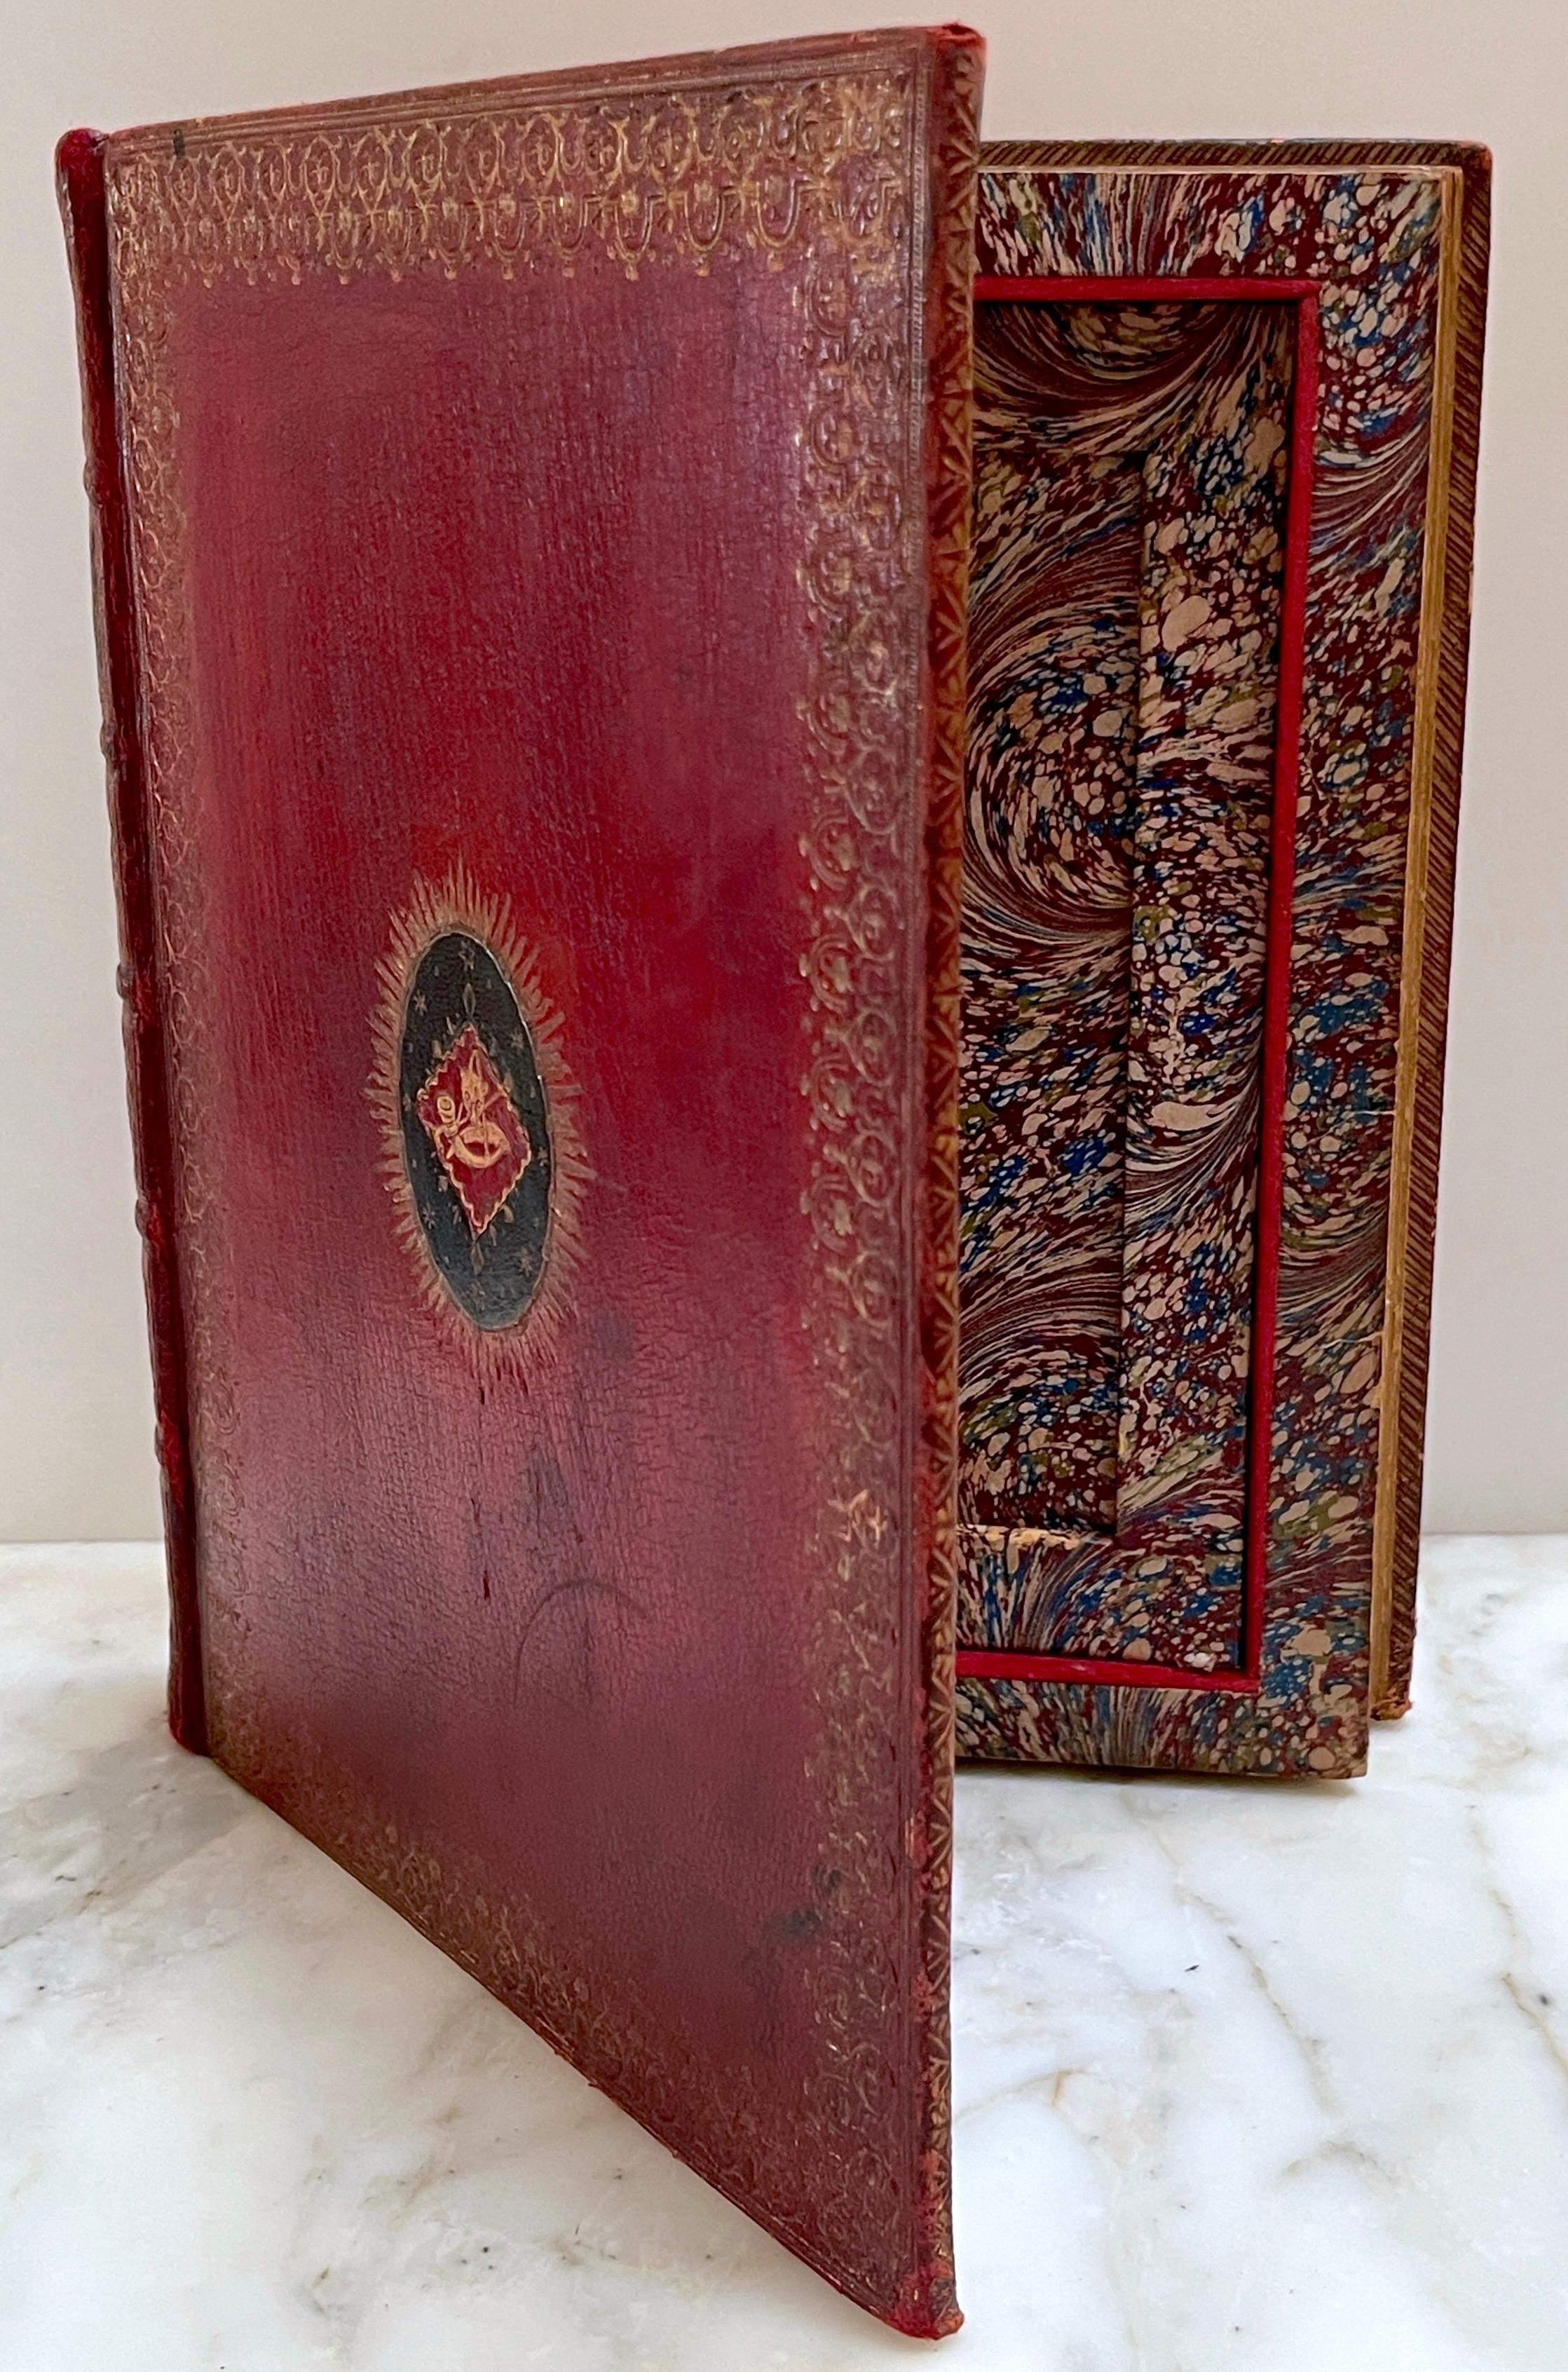 19th C. Red Embossed Leather Bound ( Faux / Dummy) Book Box 'Hunt Buttons' 
England, circa 1890s

This 19th-century red embossed leather bound book box, titled 'Hunt Buttons,' is a remarkable piece with both decorative and functional appeal. The